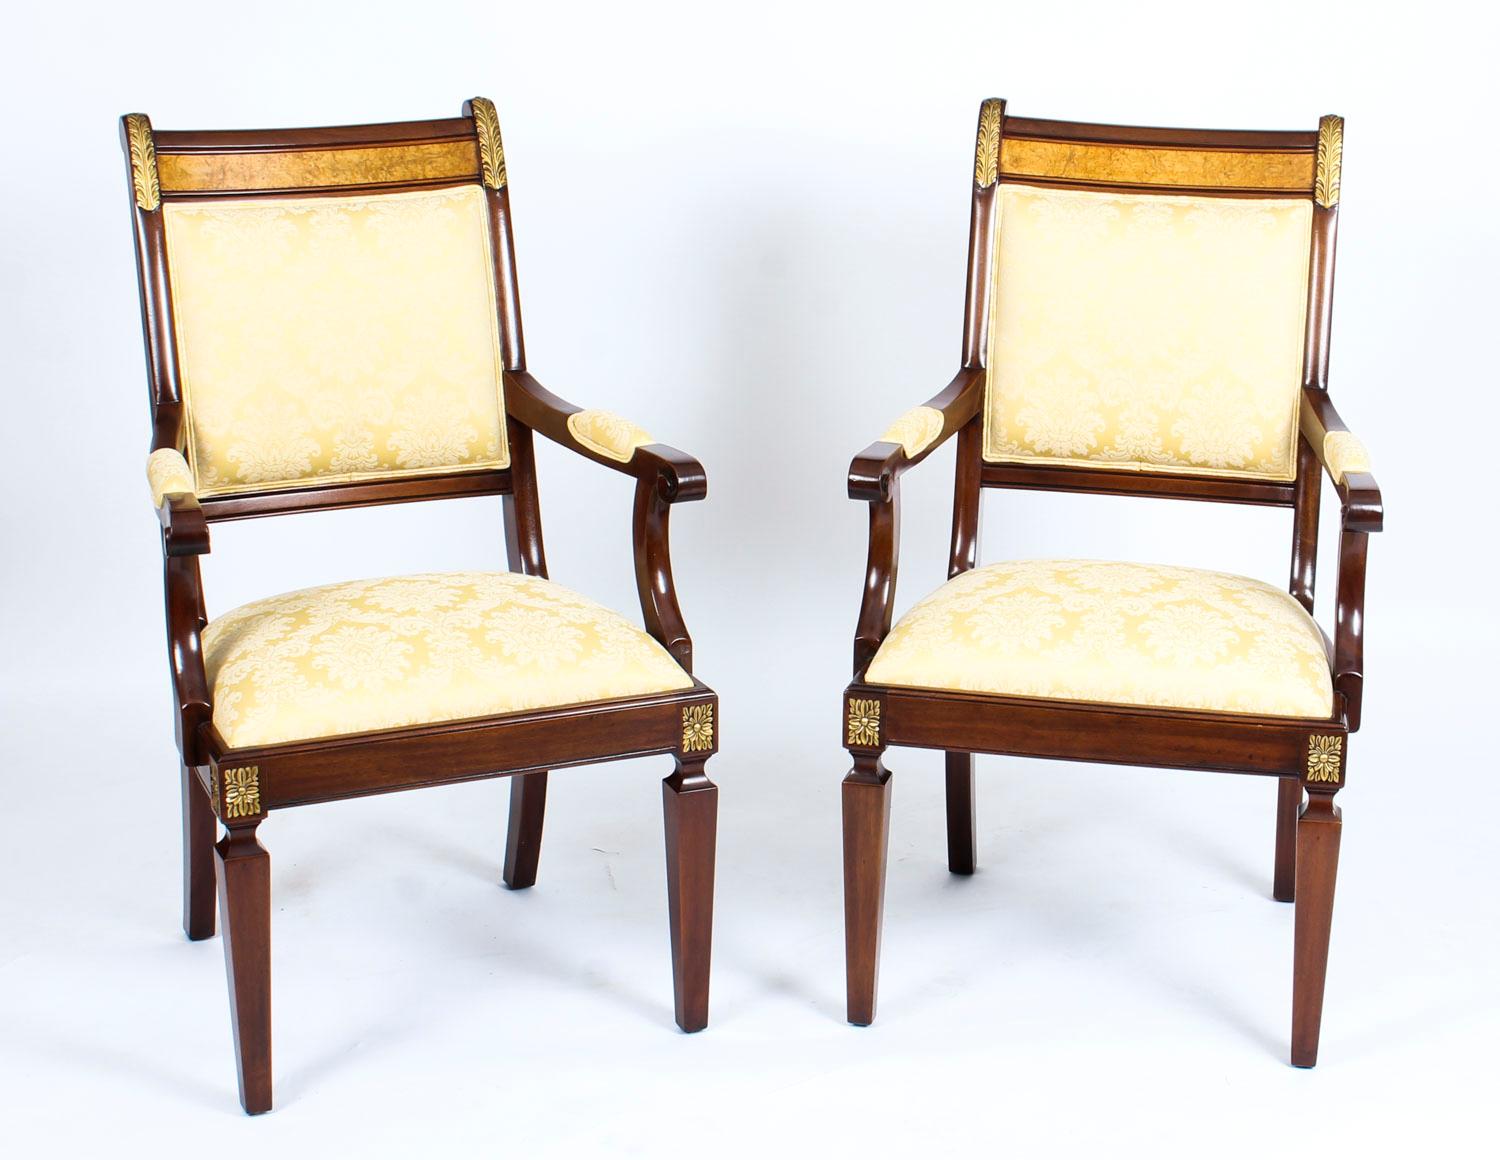 Vintage Pair of Empire Revival Mahogany and Ormolu Armchairs by Charles Barr 10